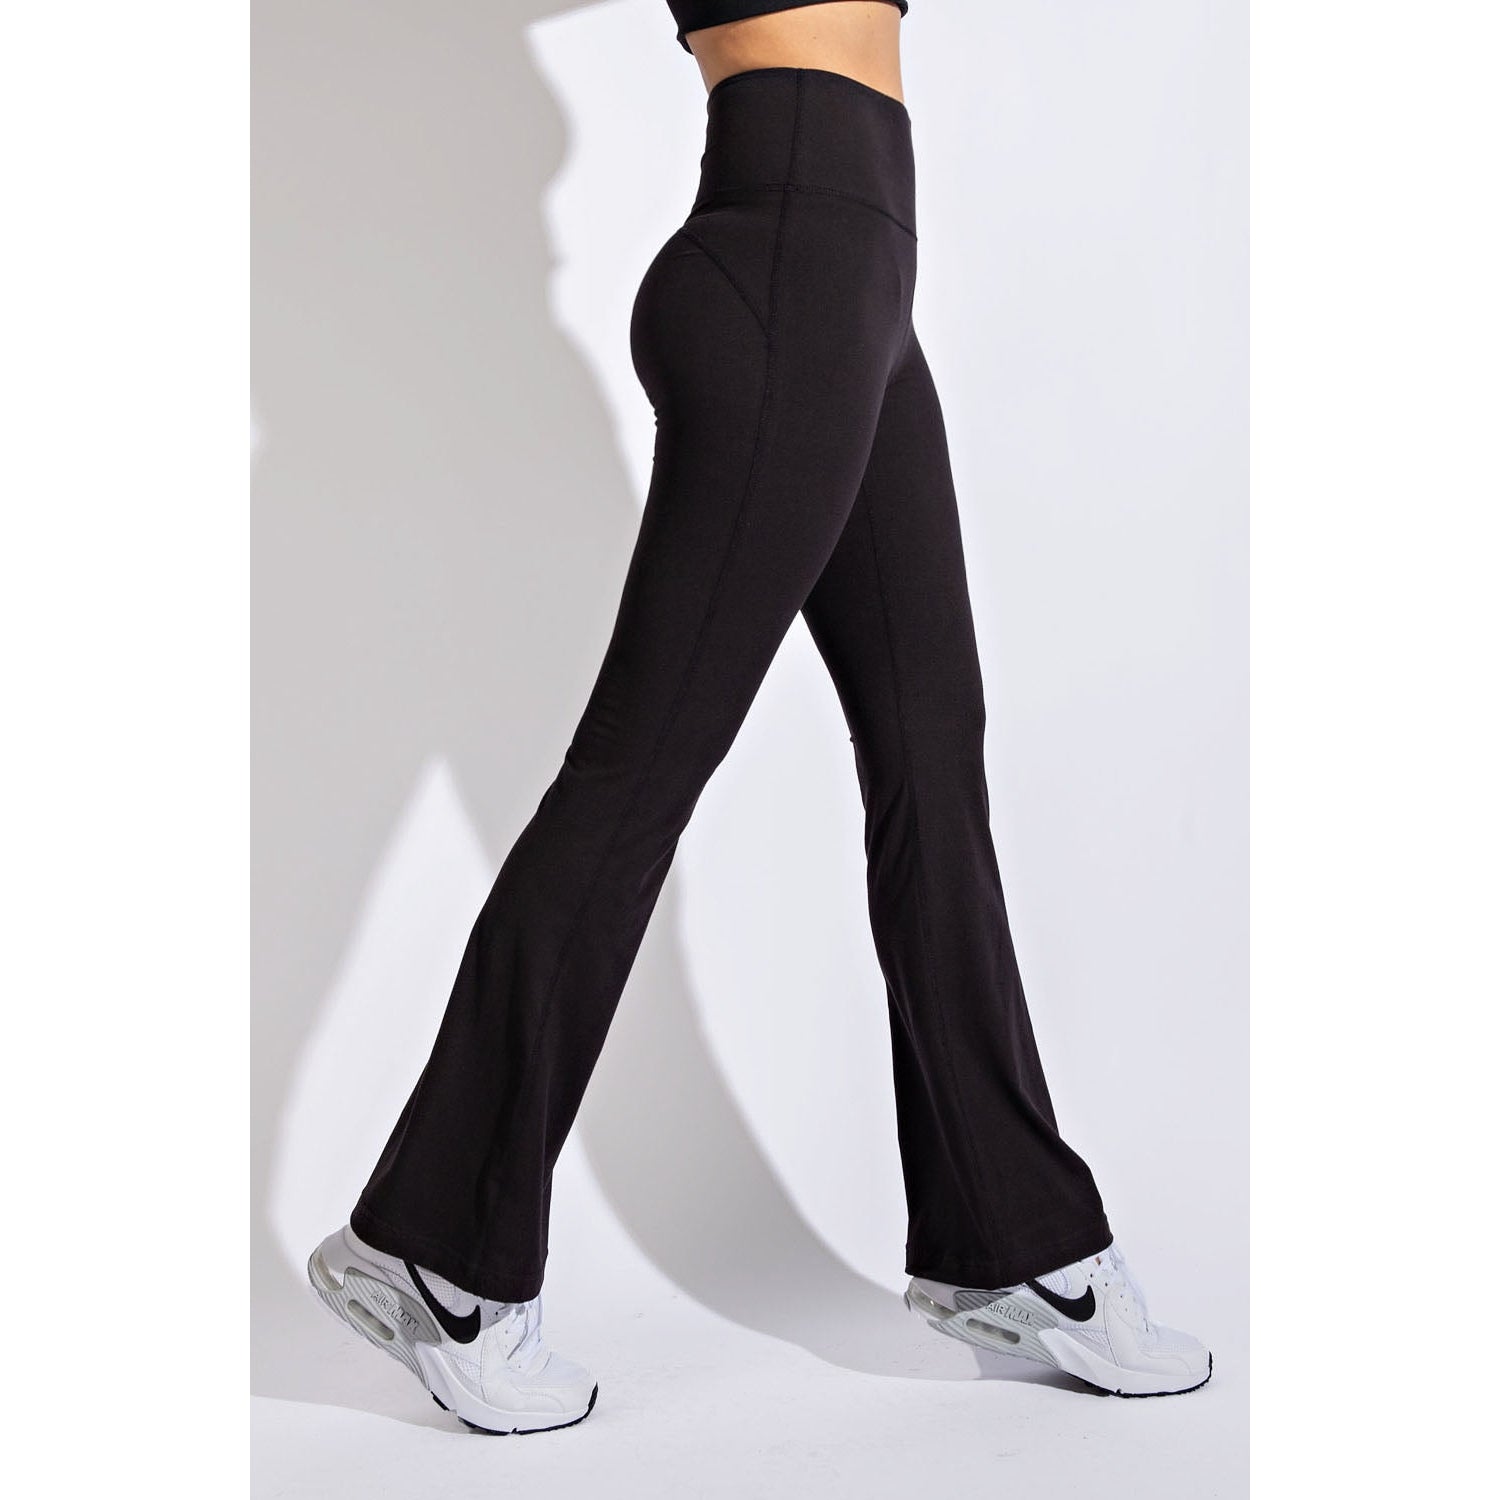 BUTTERSOFT FLARED YOGA PANTS – Body and Sol